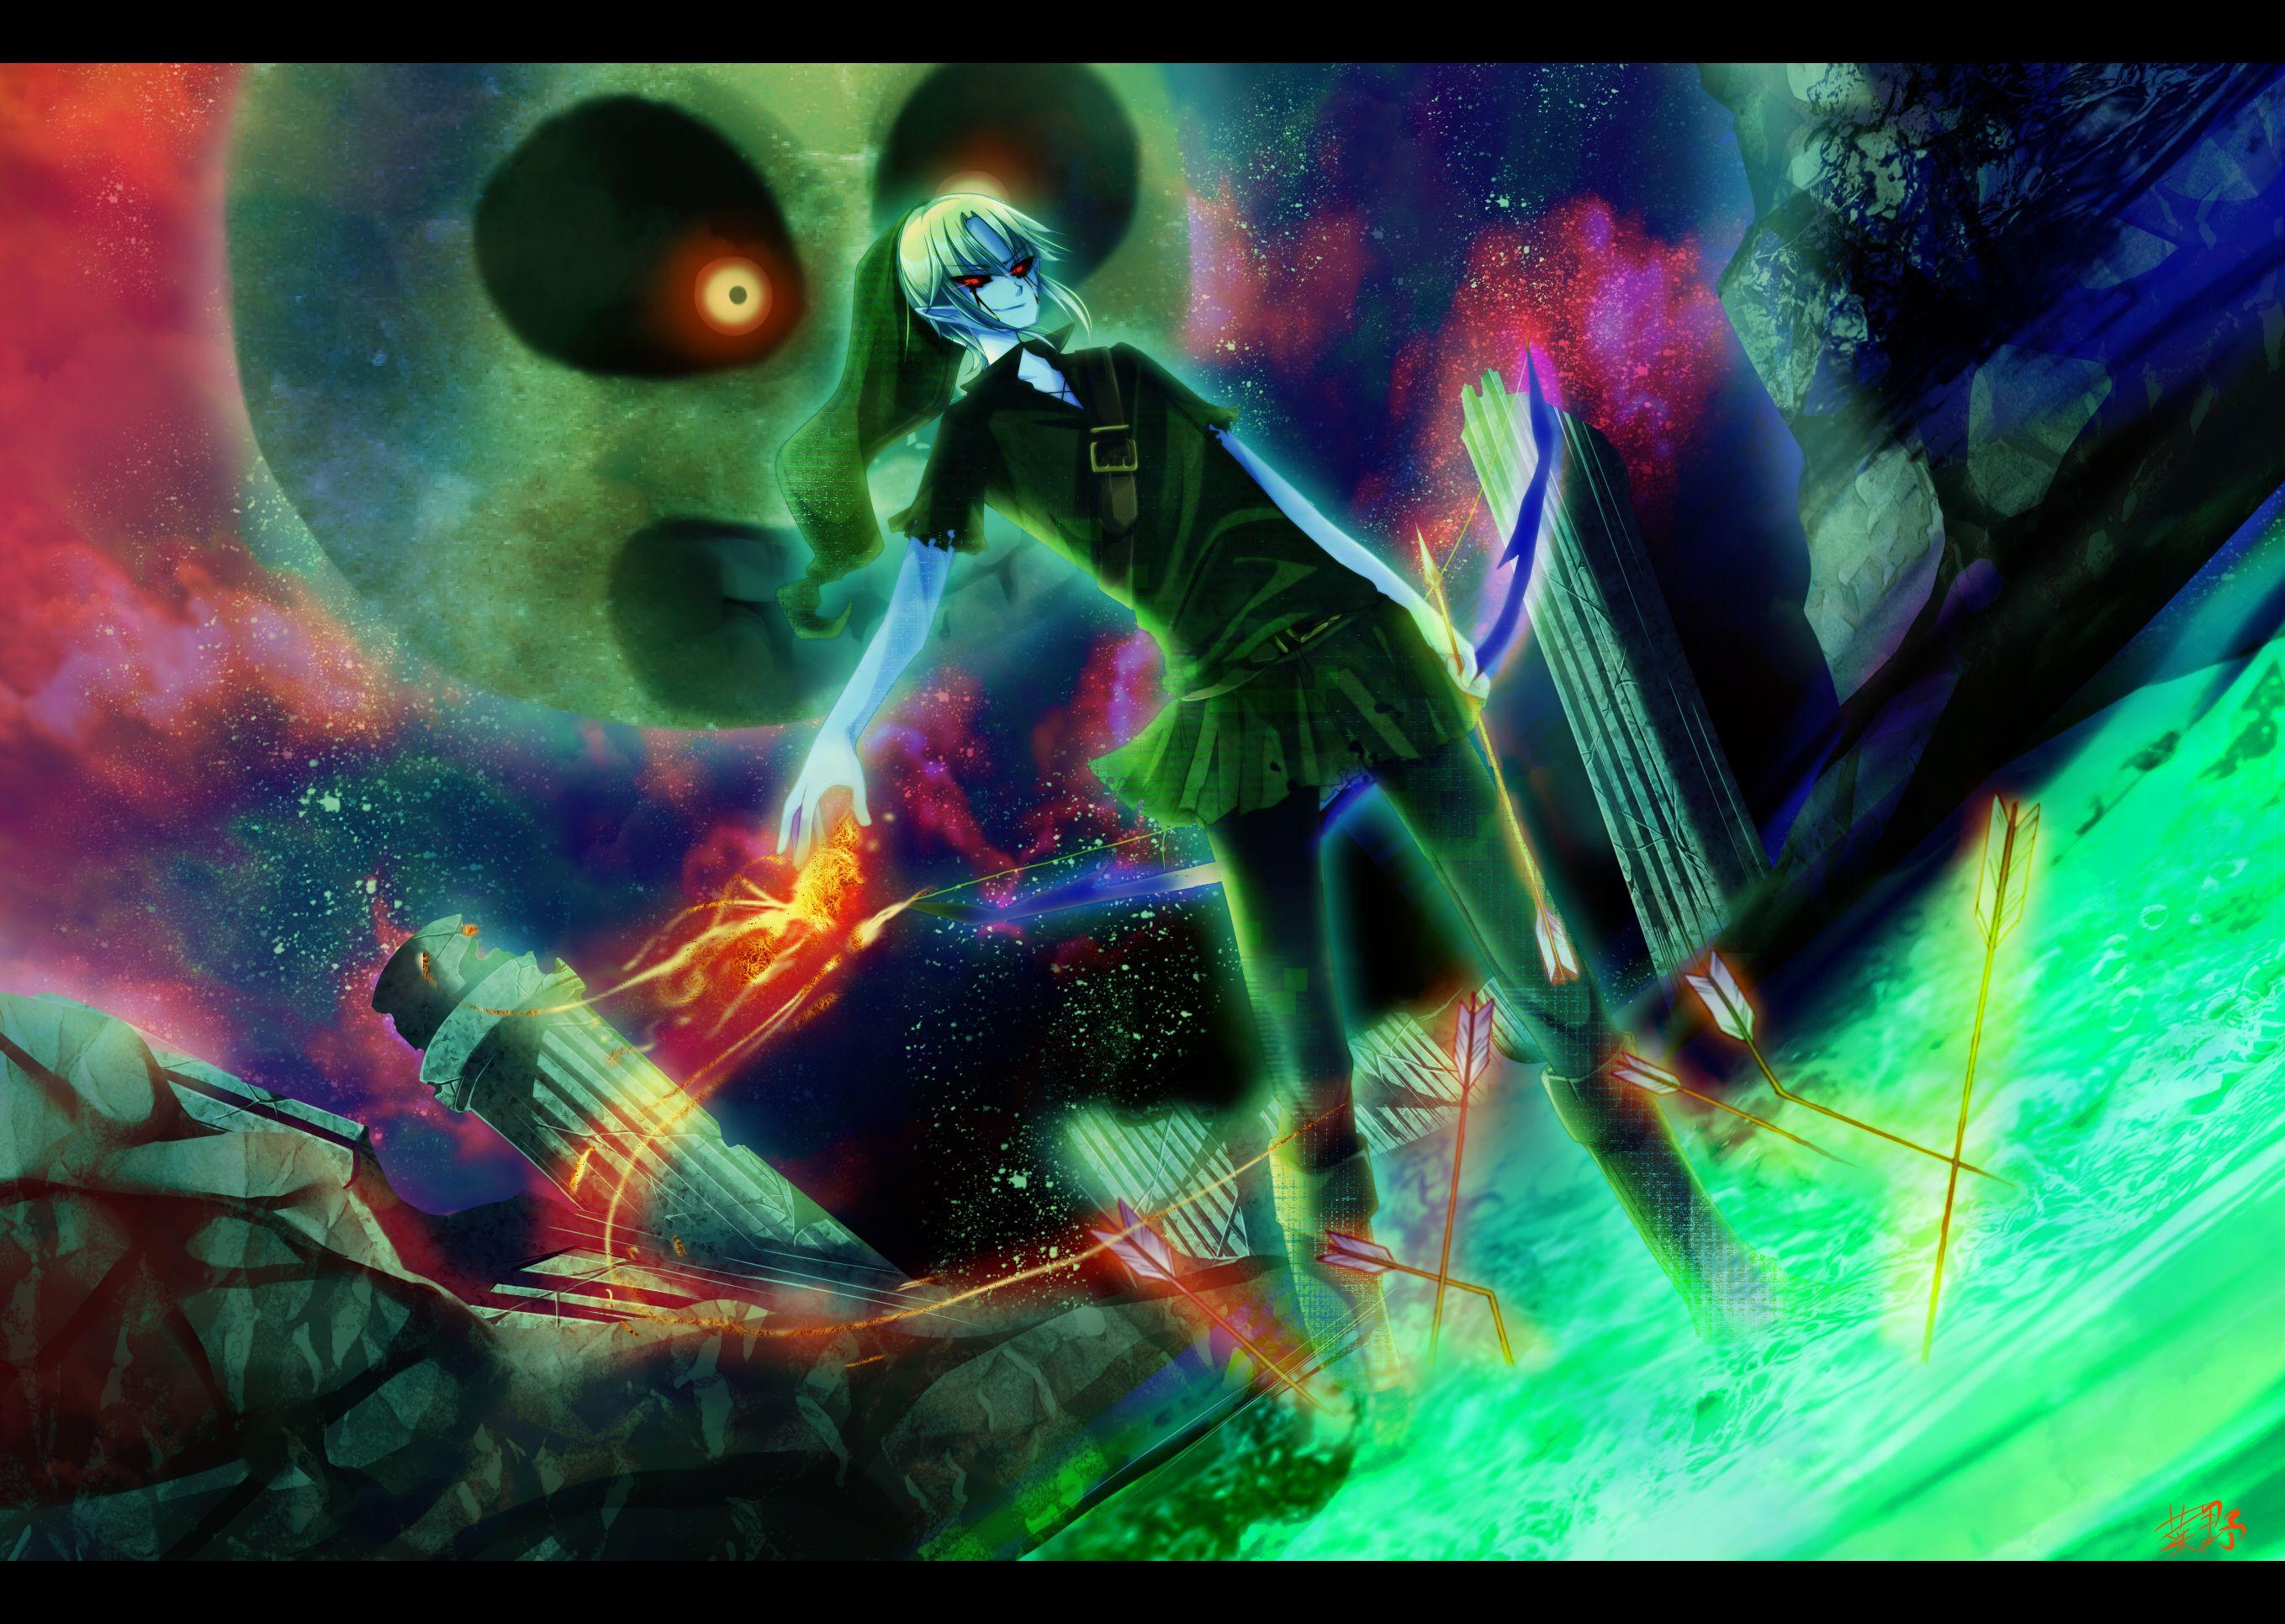 BEN Drowned Anime Image Board